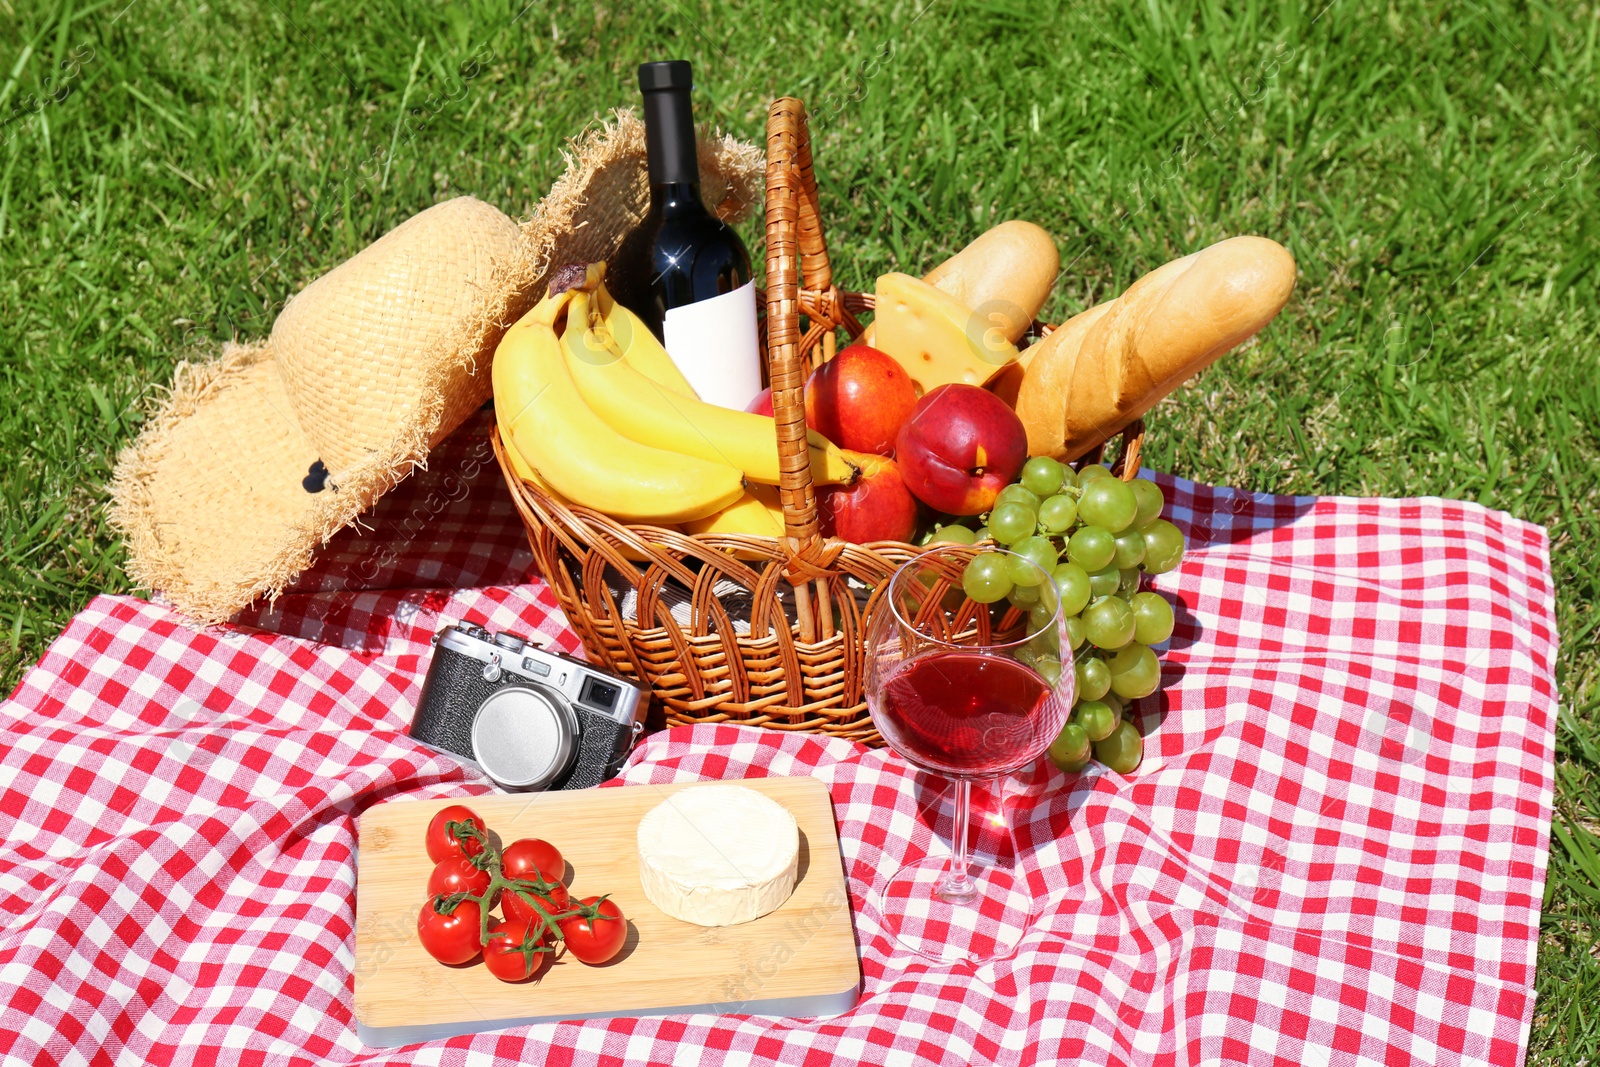 Photo of Basket with food and glass of wine on blanket prepared for picnic in park